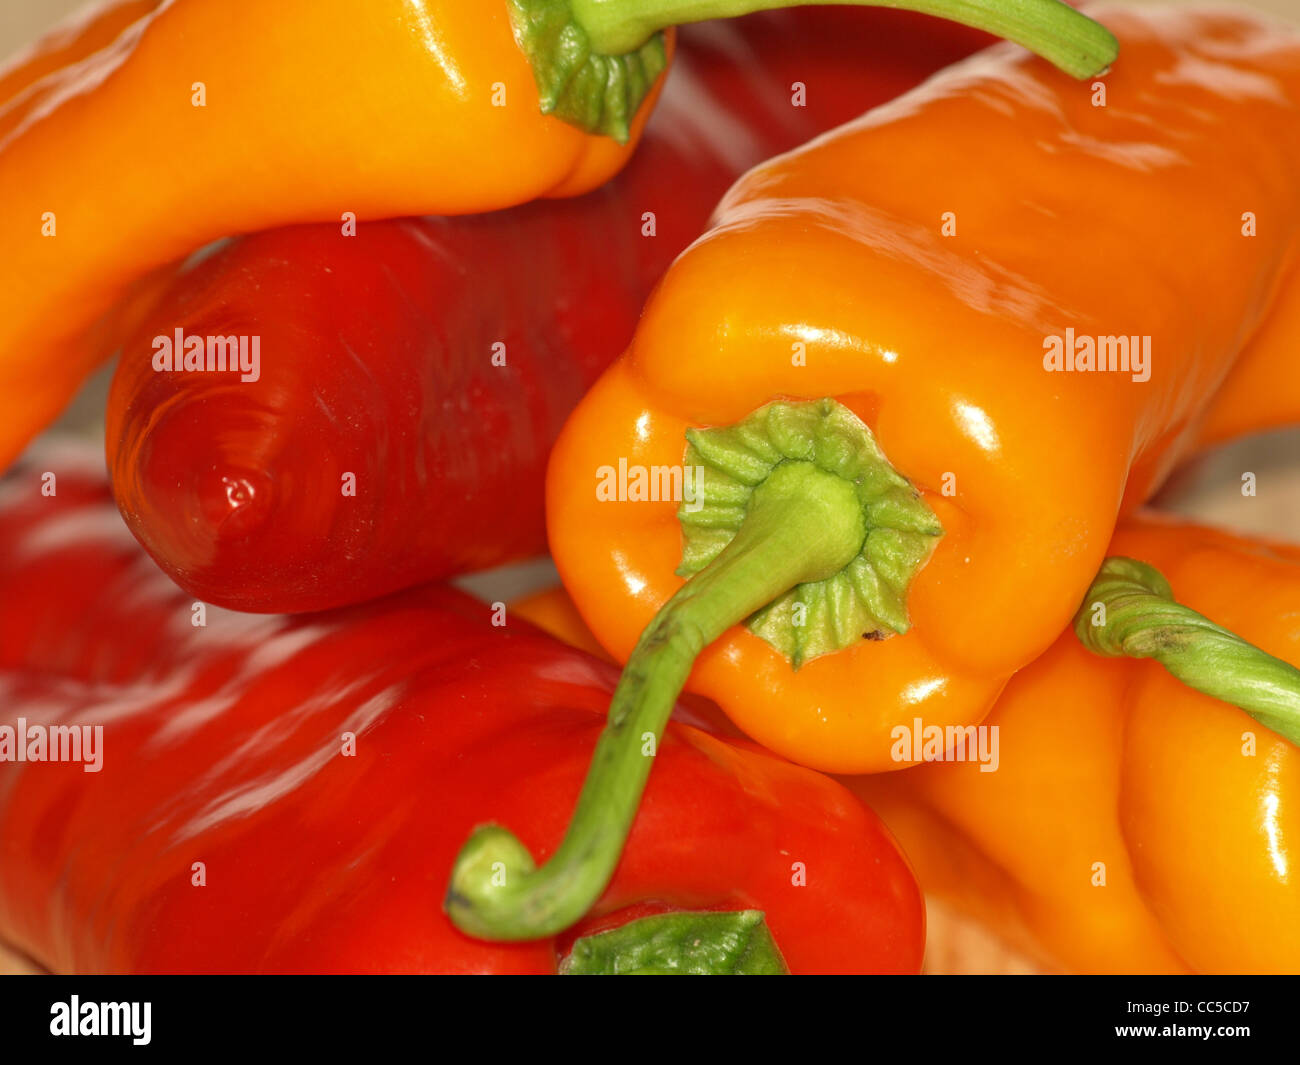 images Alamy and paprika photography hi-res - Roter stock